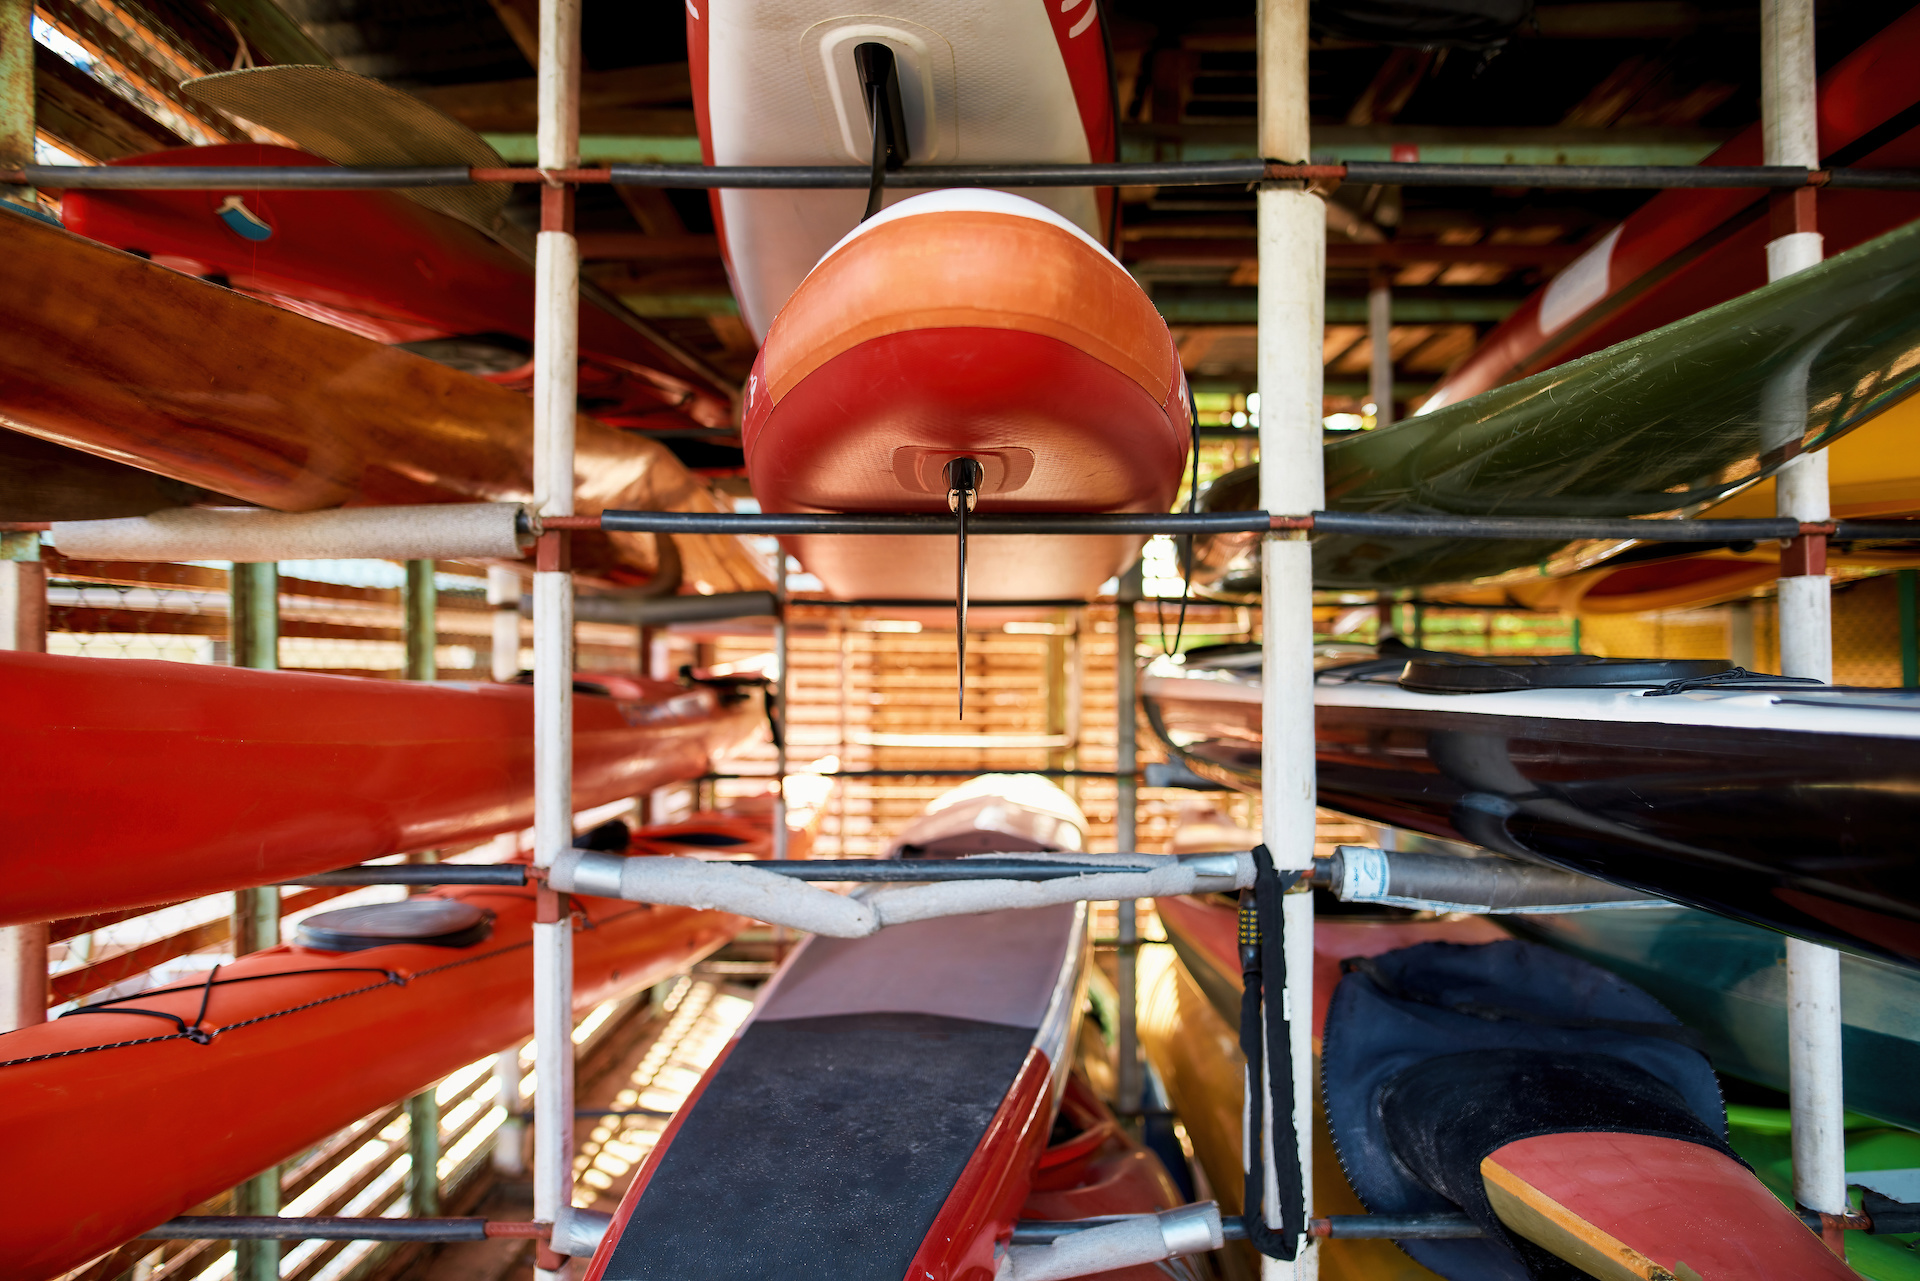 Set of water colorful kayaks on shelves in storage